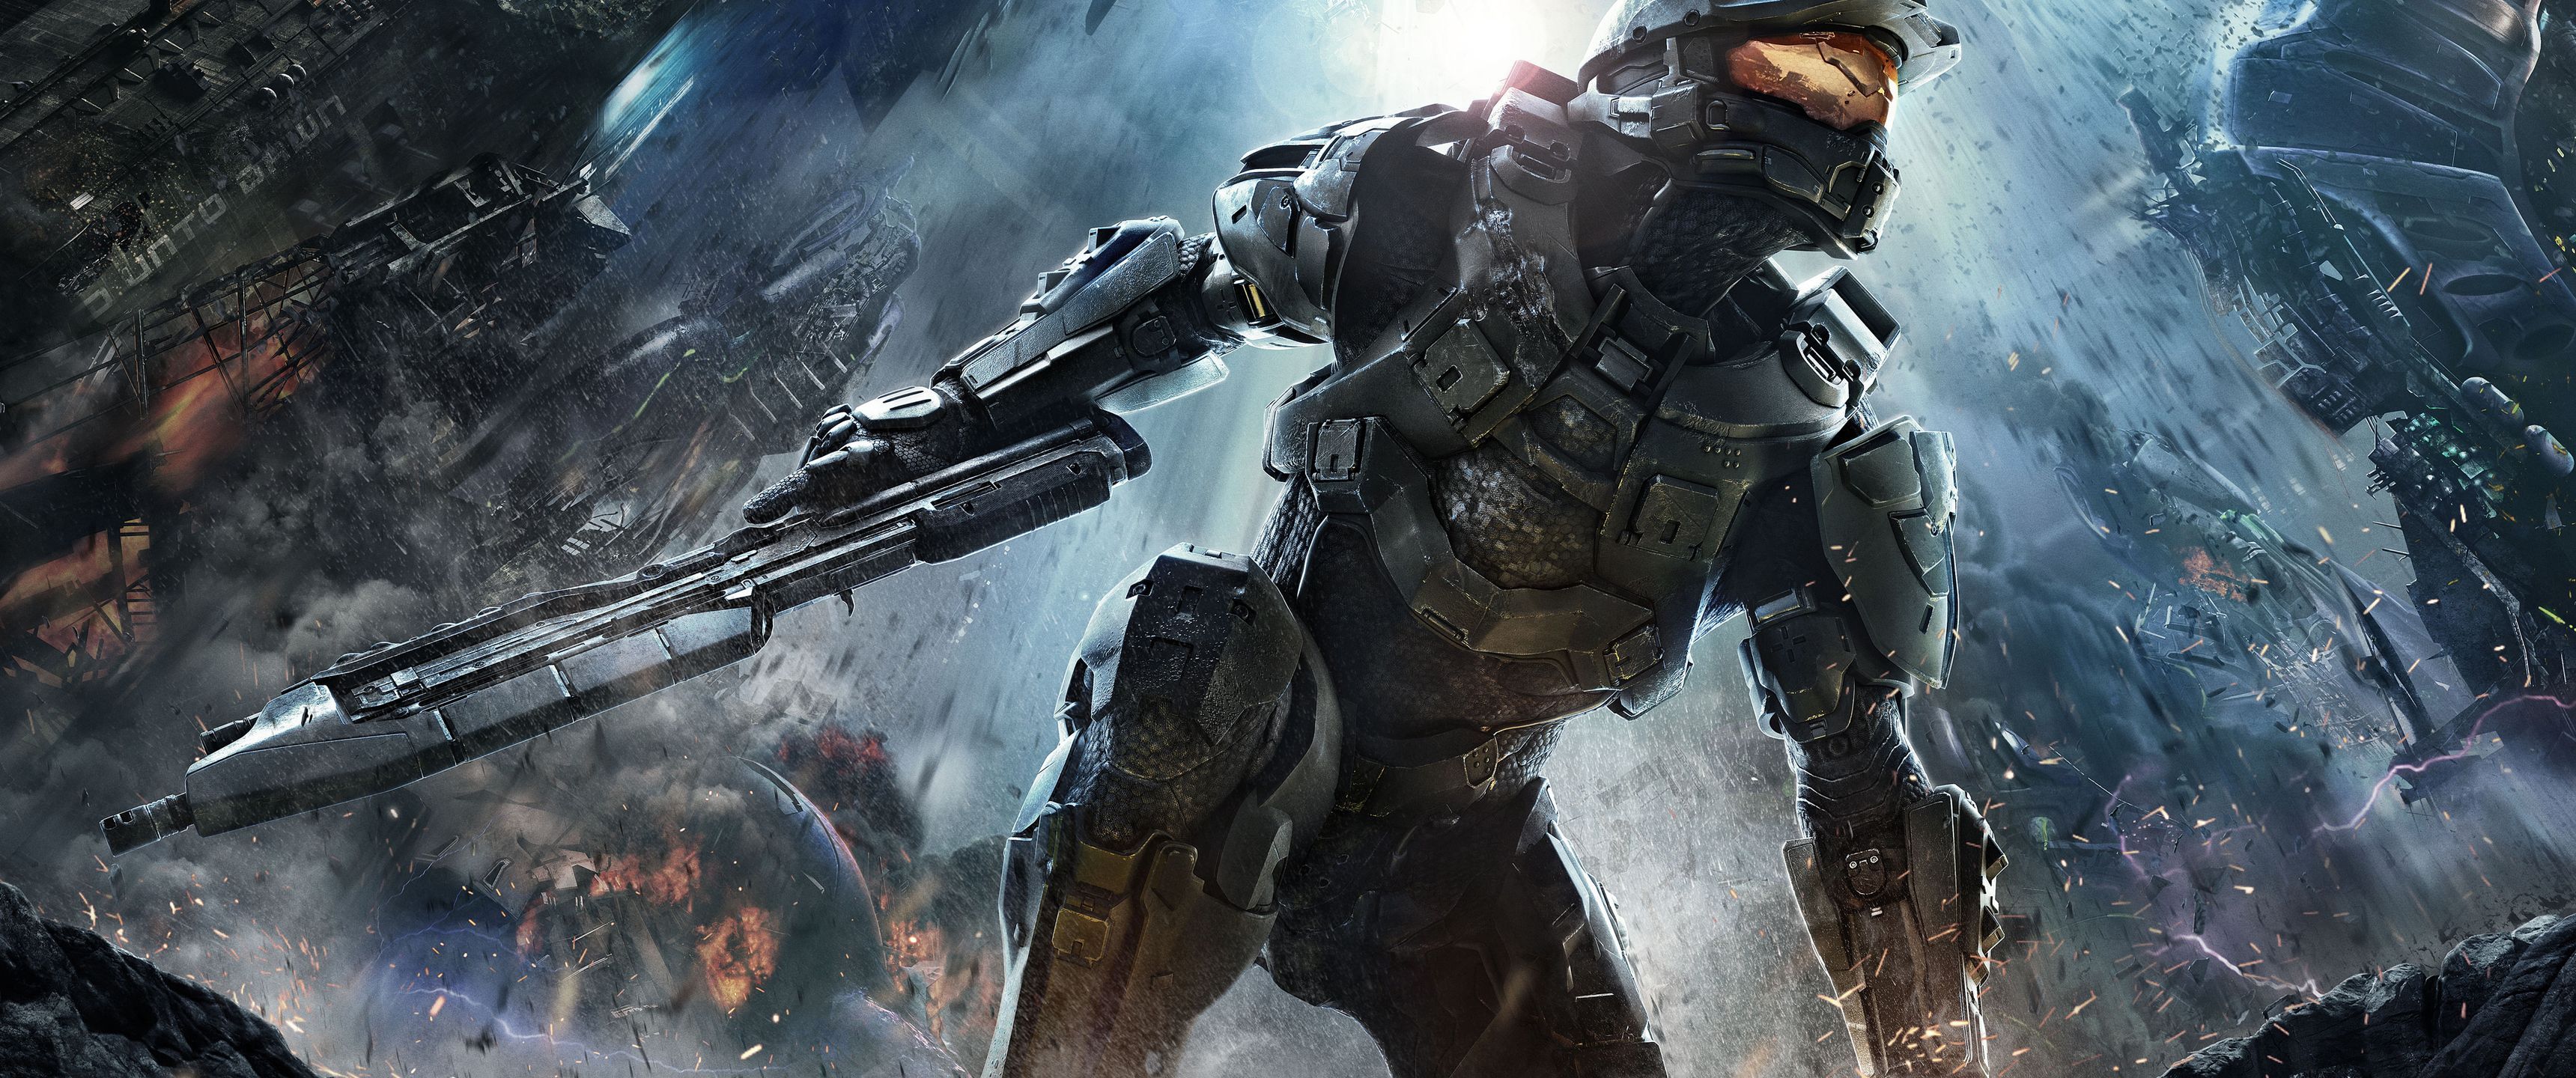 Halo 3440x1440 Wallpapers Top Free Halo 3440x1440 Backgrounds Wallpaperaccess 3713